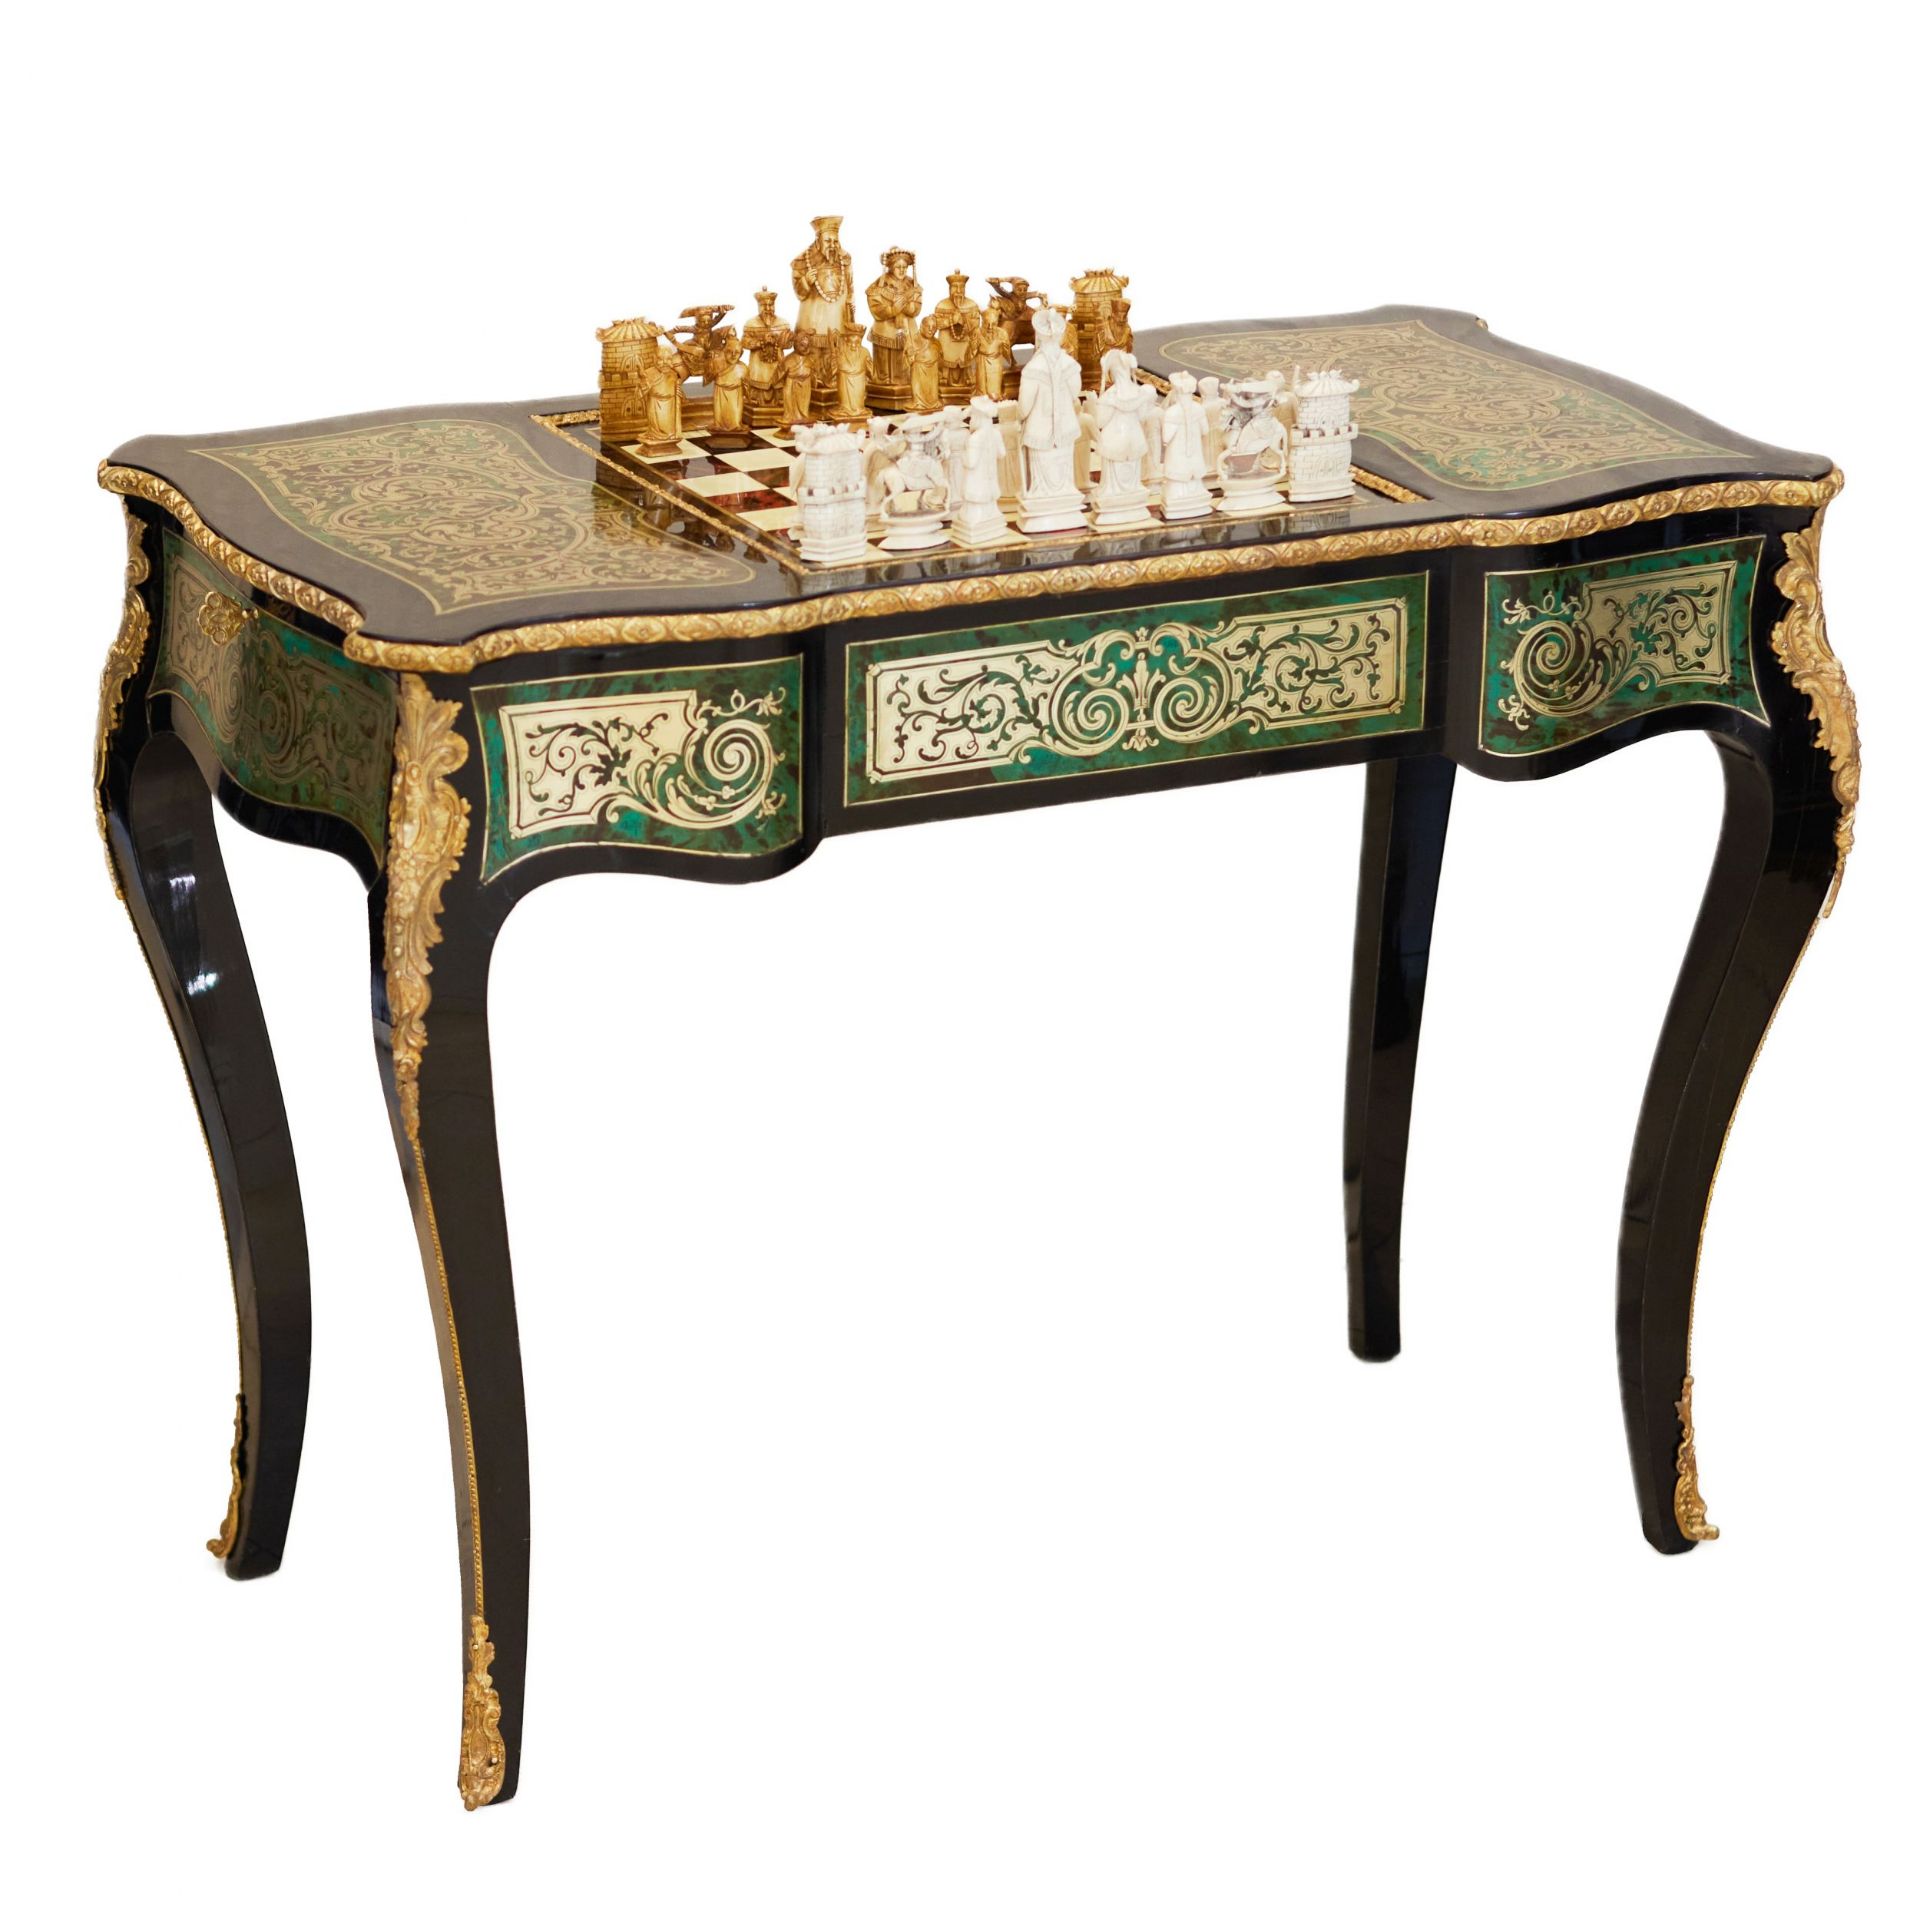 Game chess table in Boulle style. France. Turn of the 19th-20th century. - Image 11 of 11